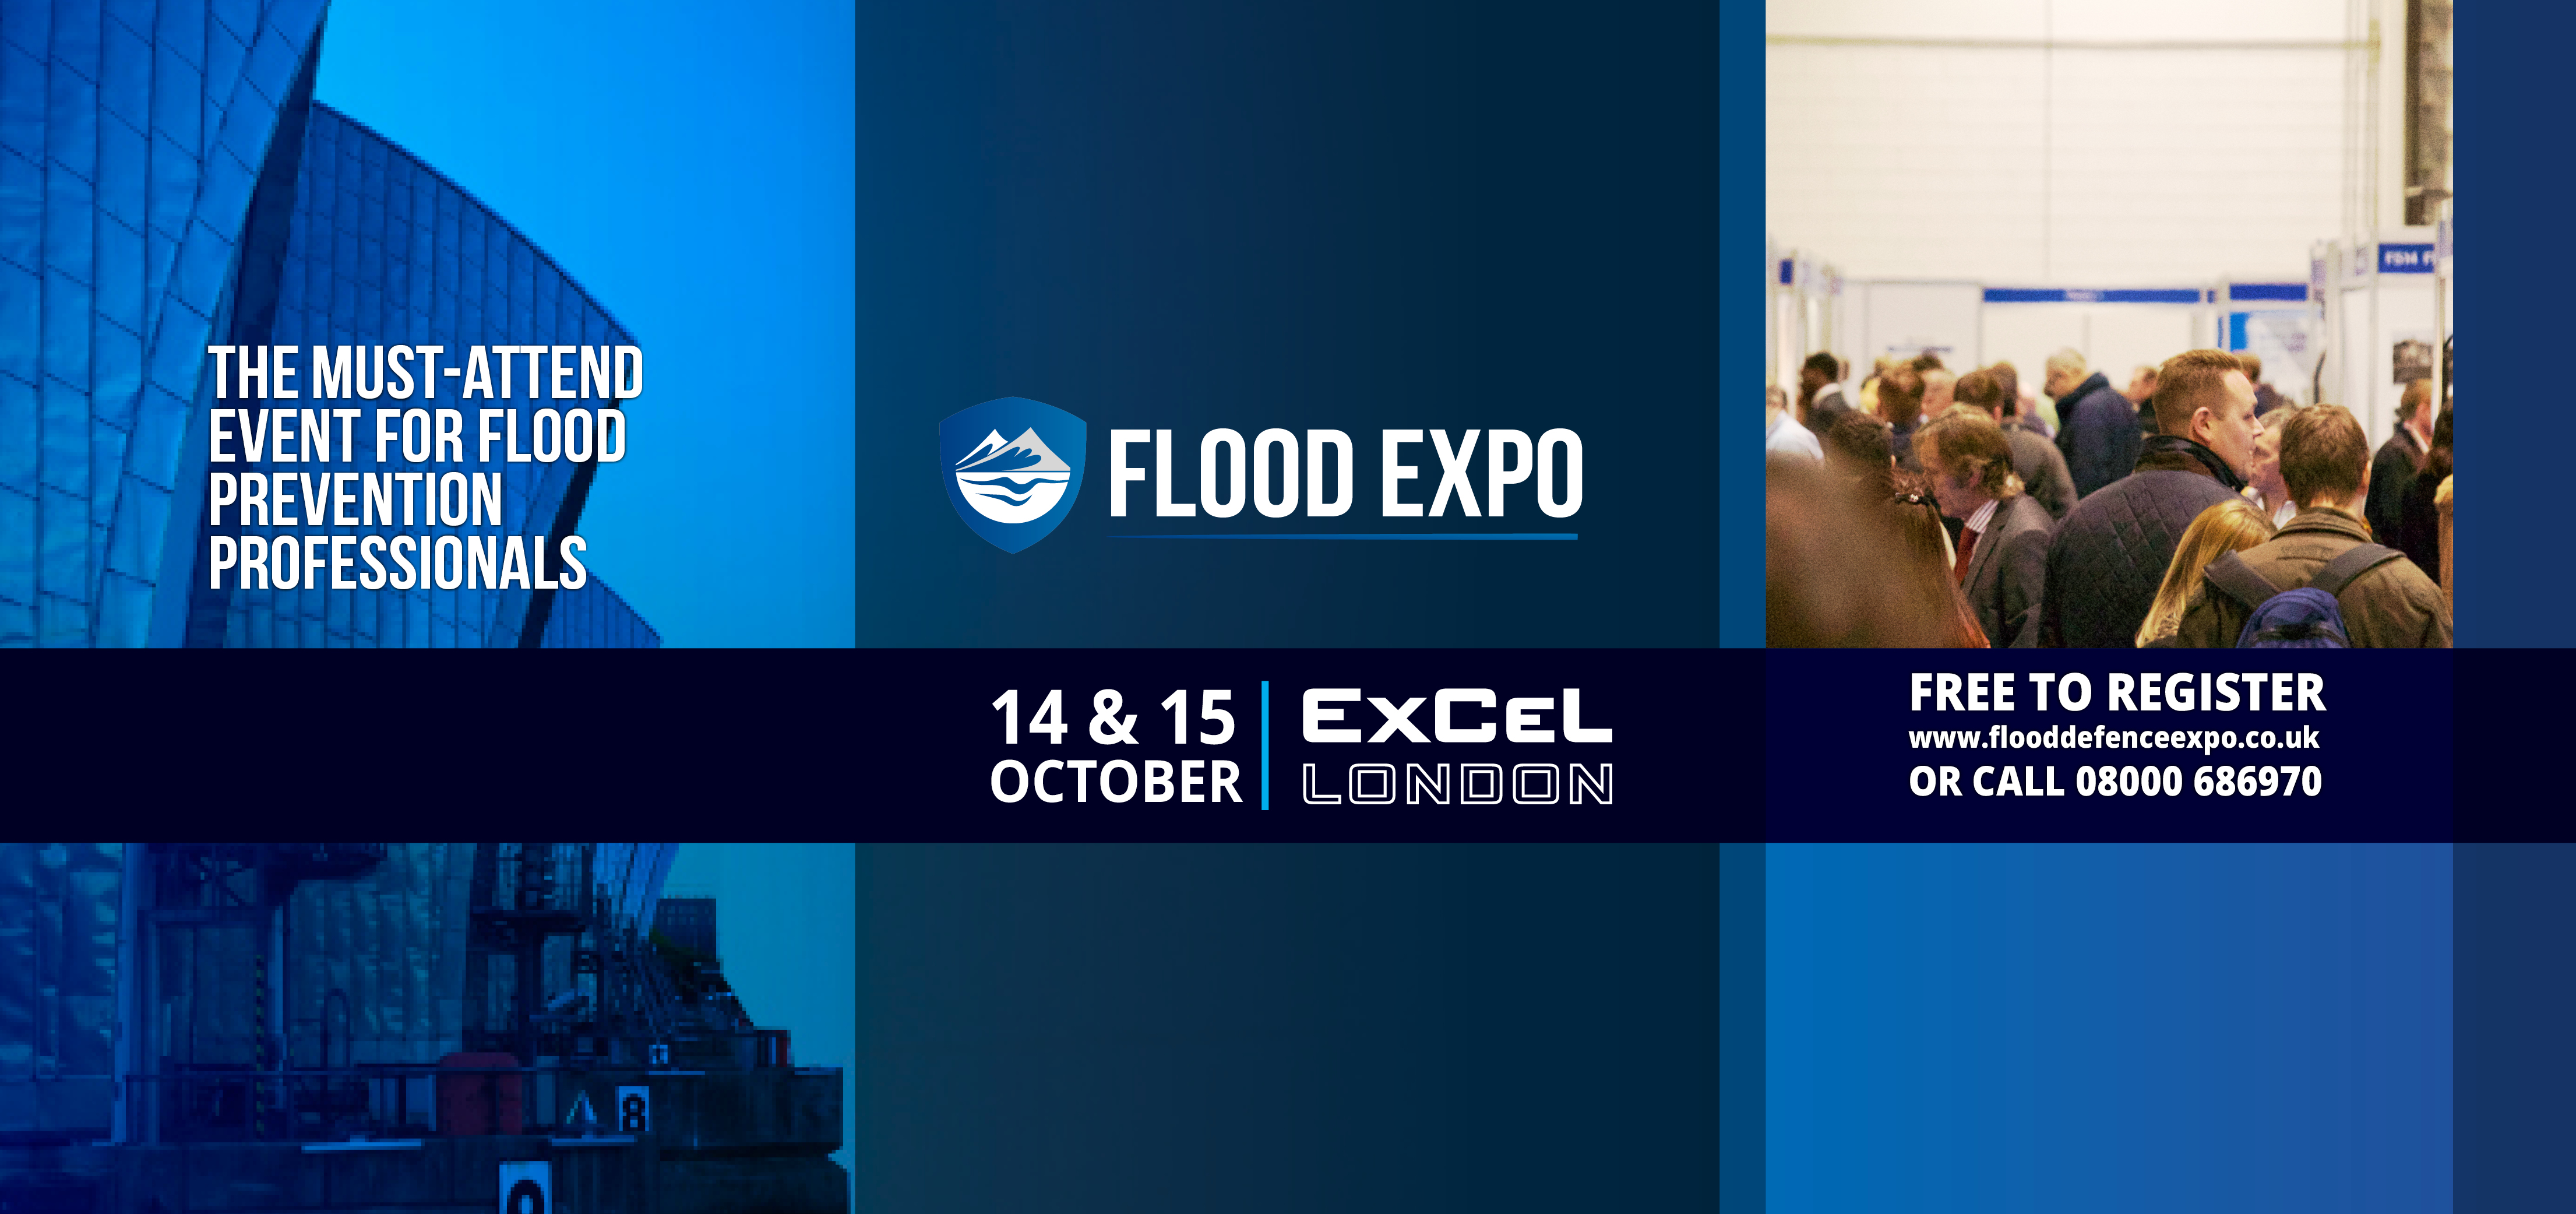 Check out the world&#039;s leading event dedicated to flooding, The Flood Expo. Tickets are free if you follow this link www.thefloodexpo.co.uk/track...